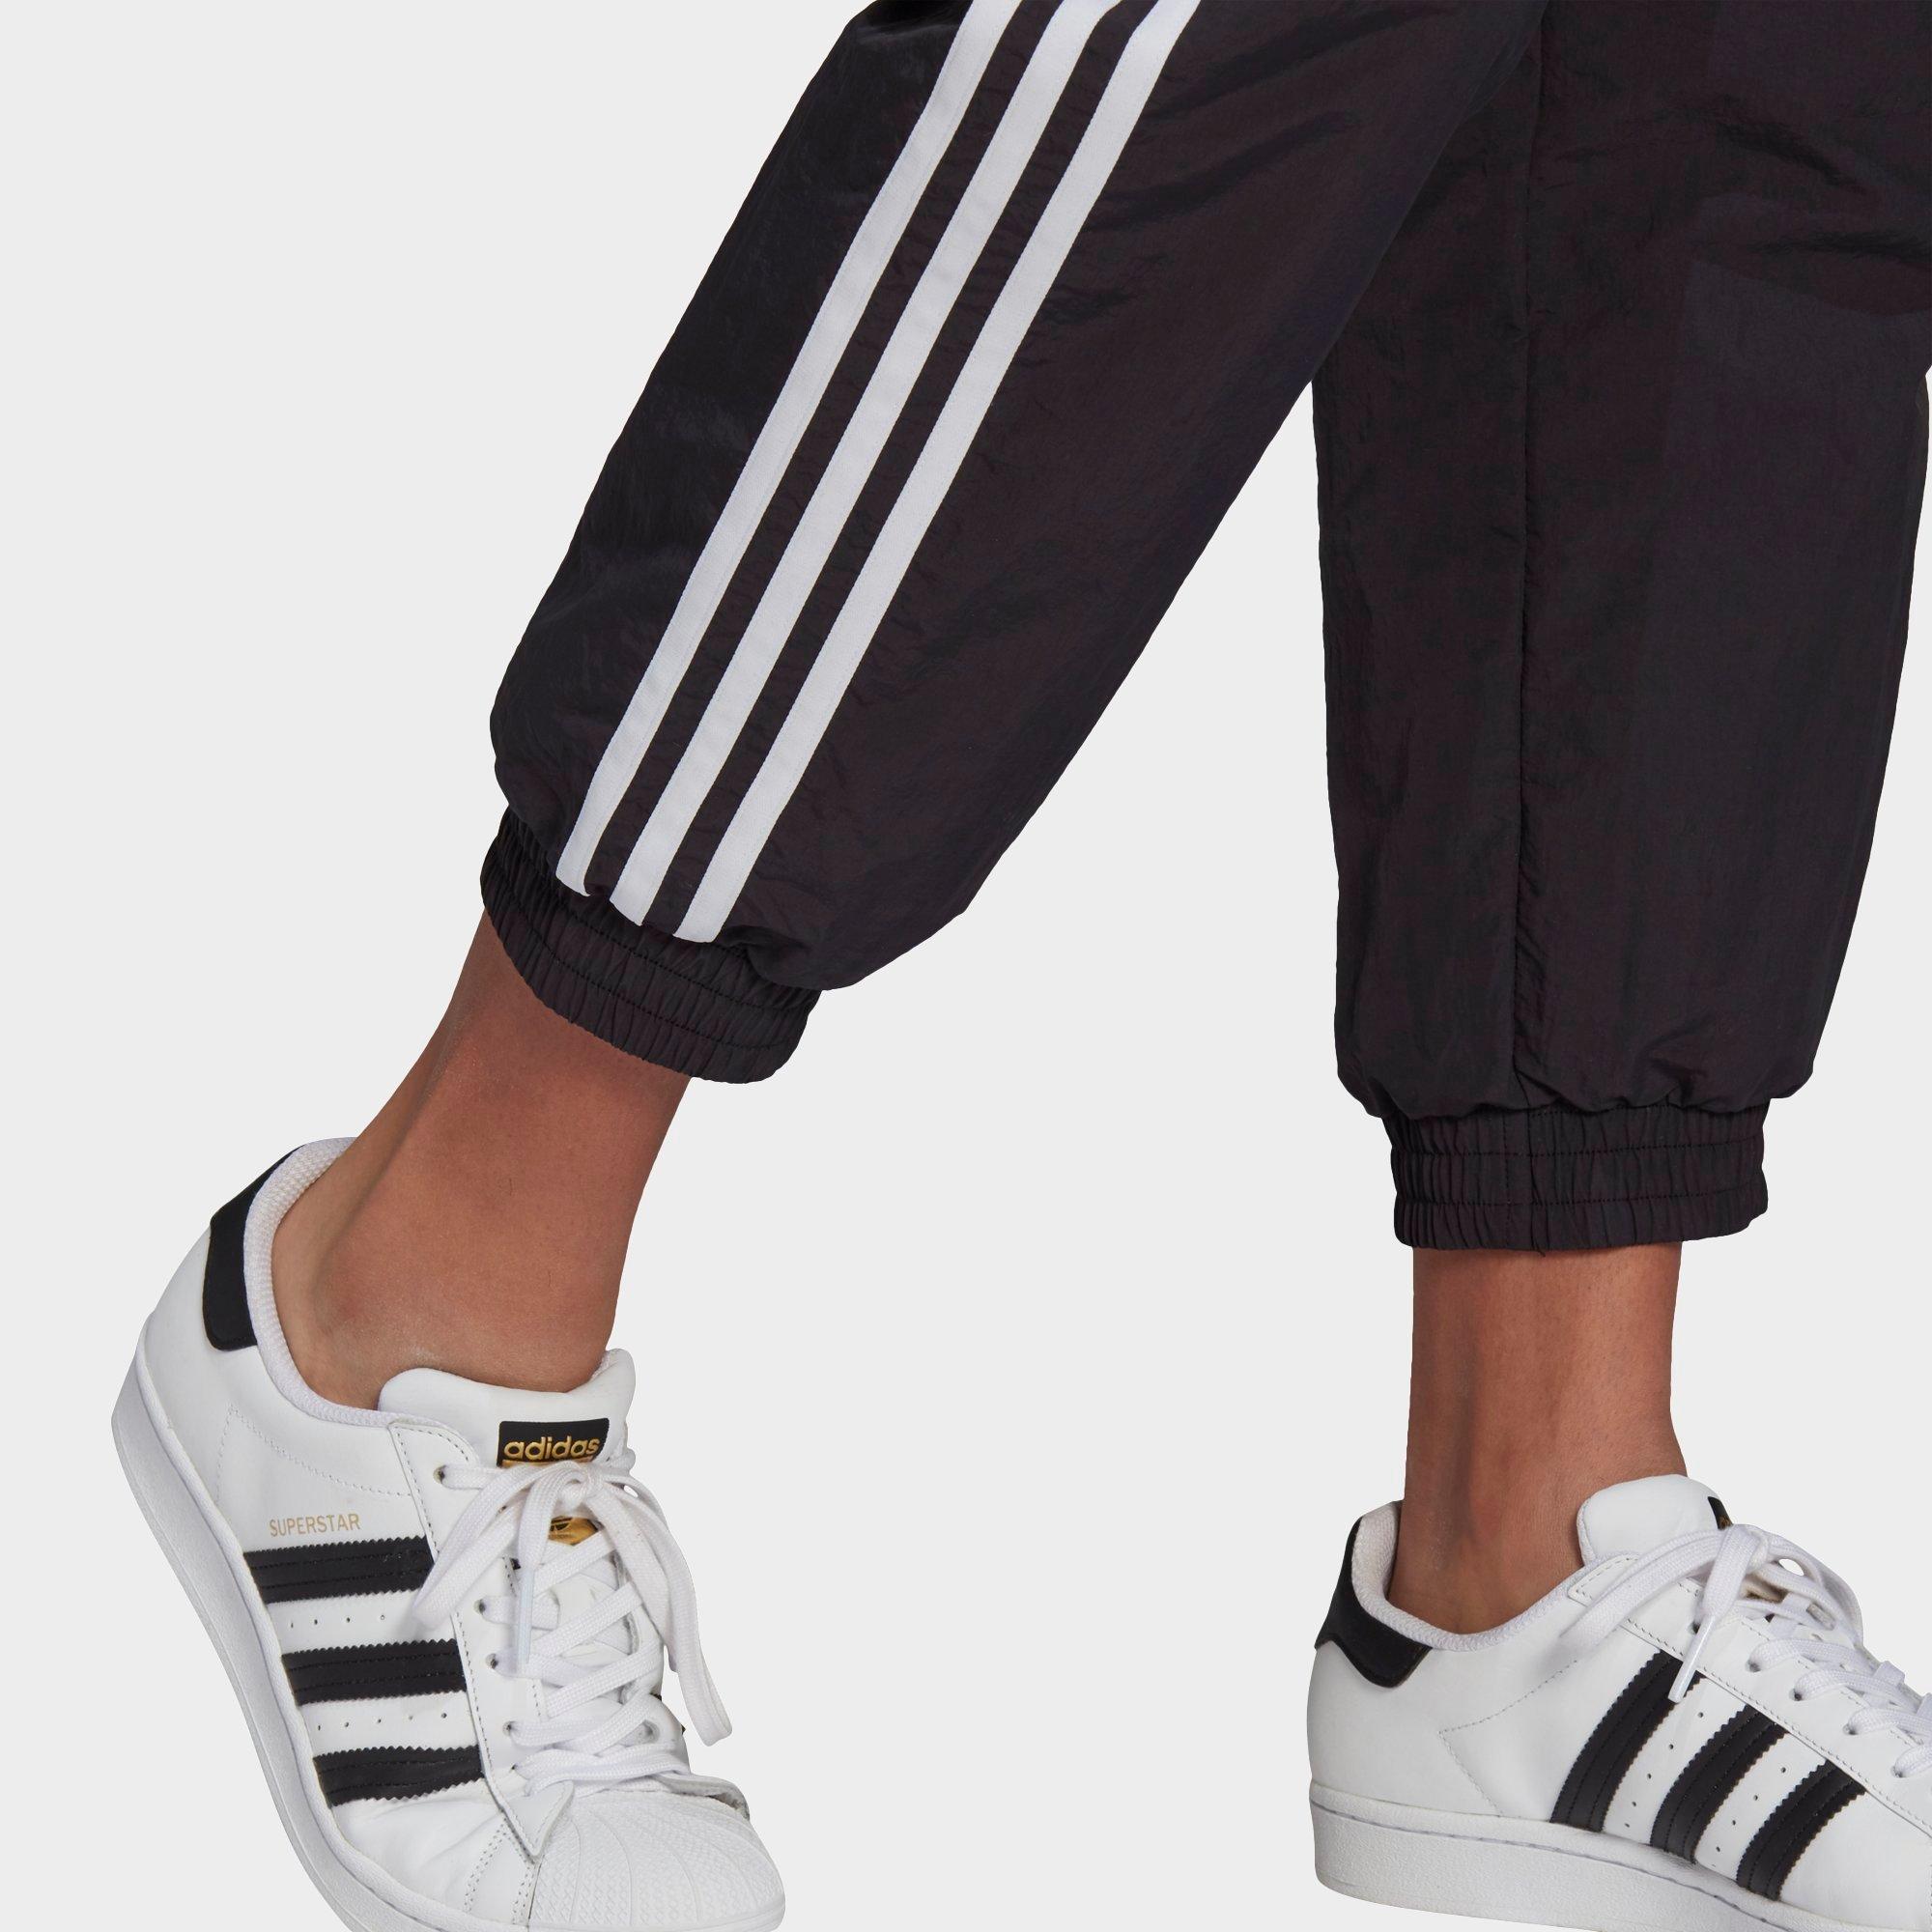 adidas training pants outfit